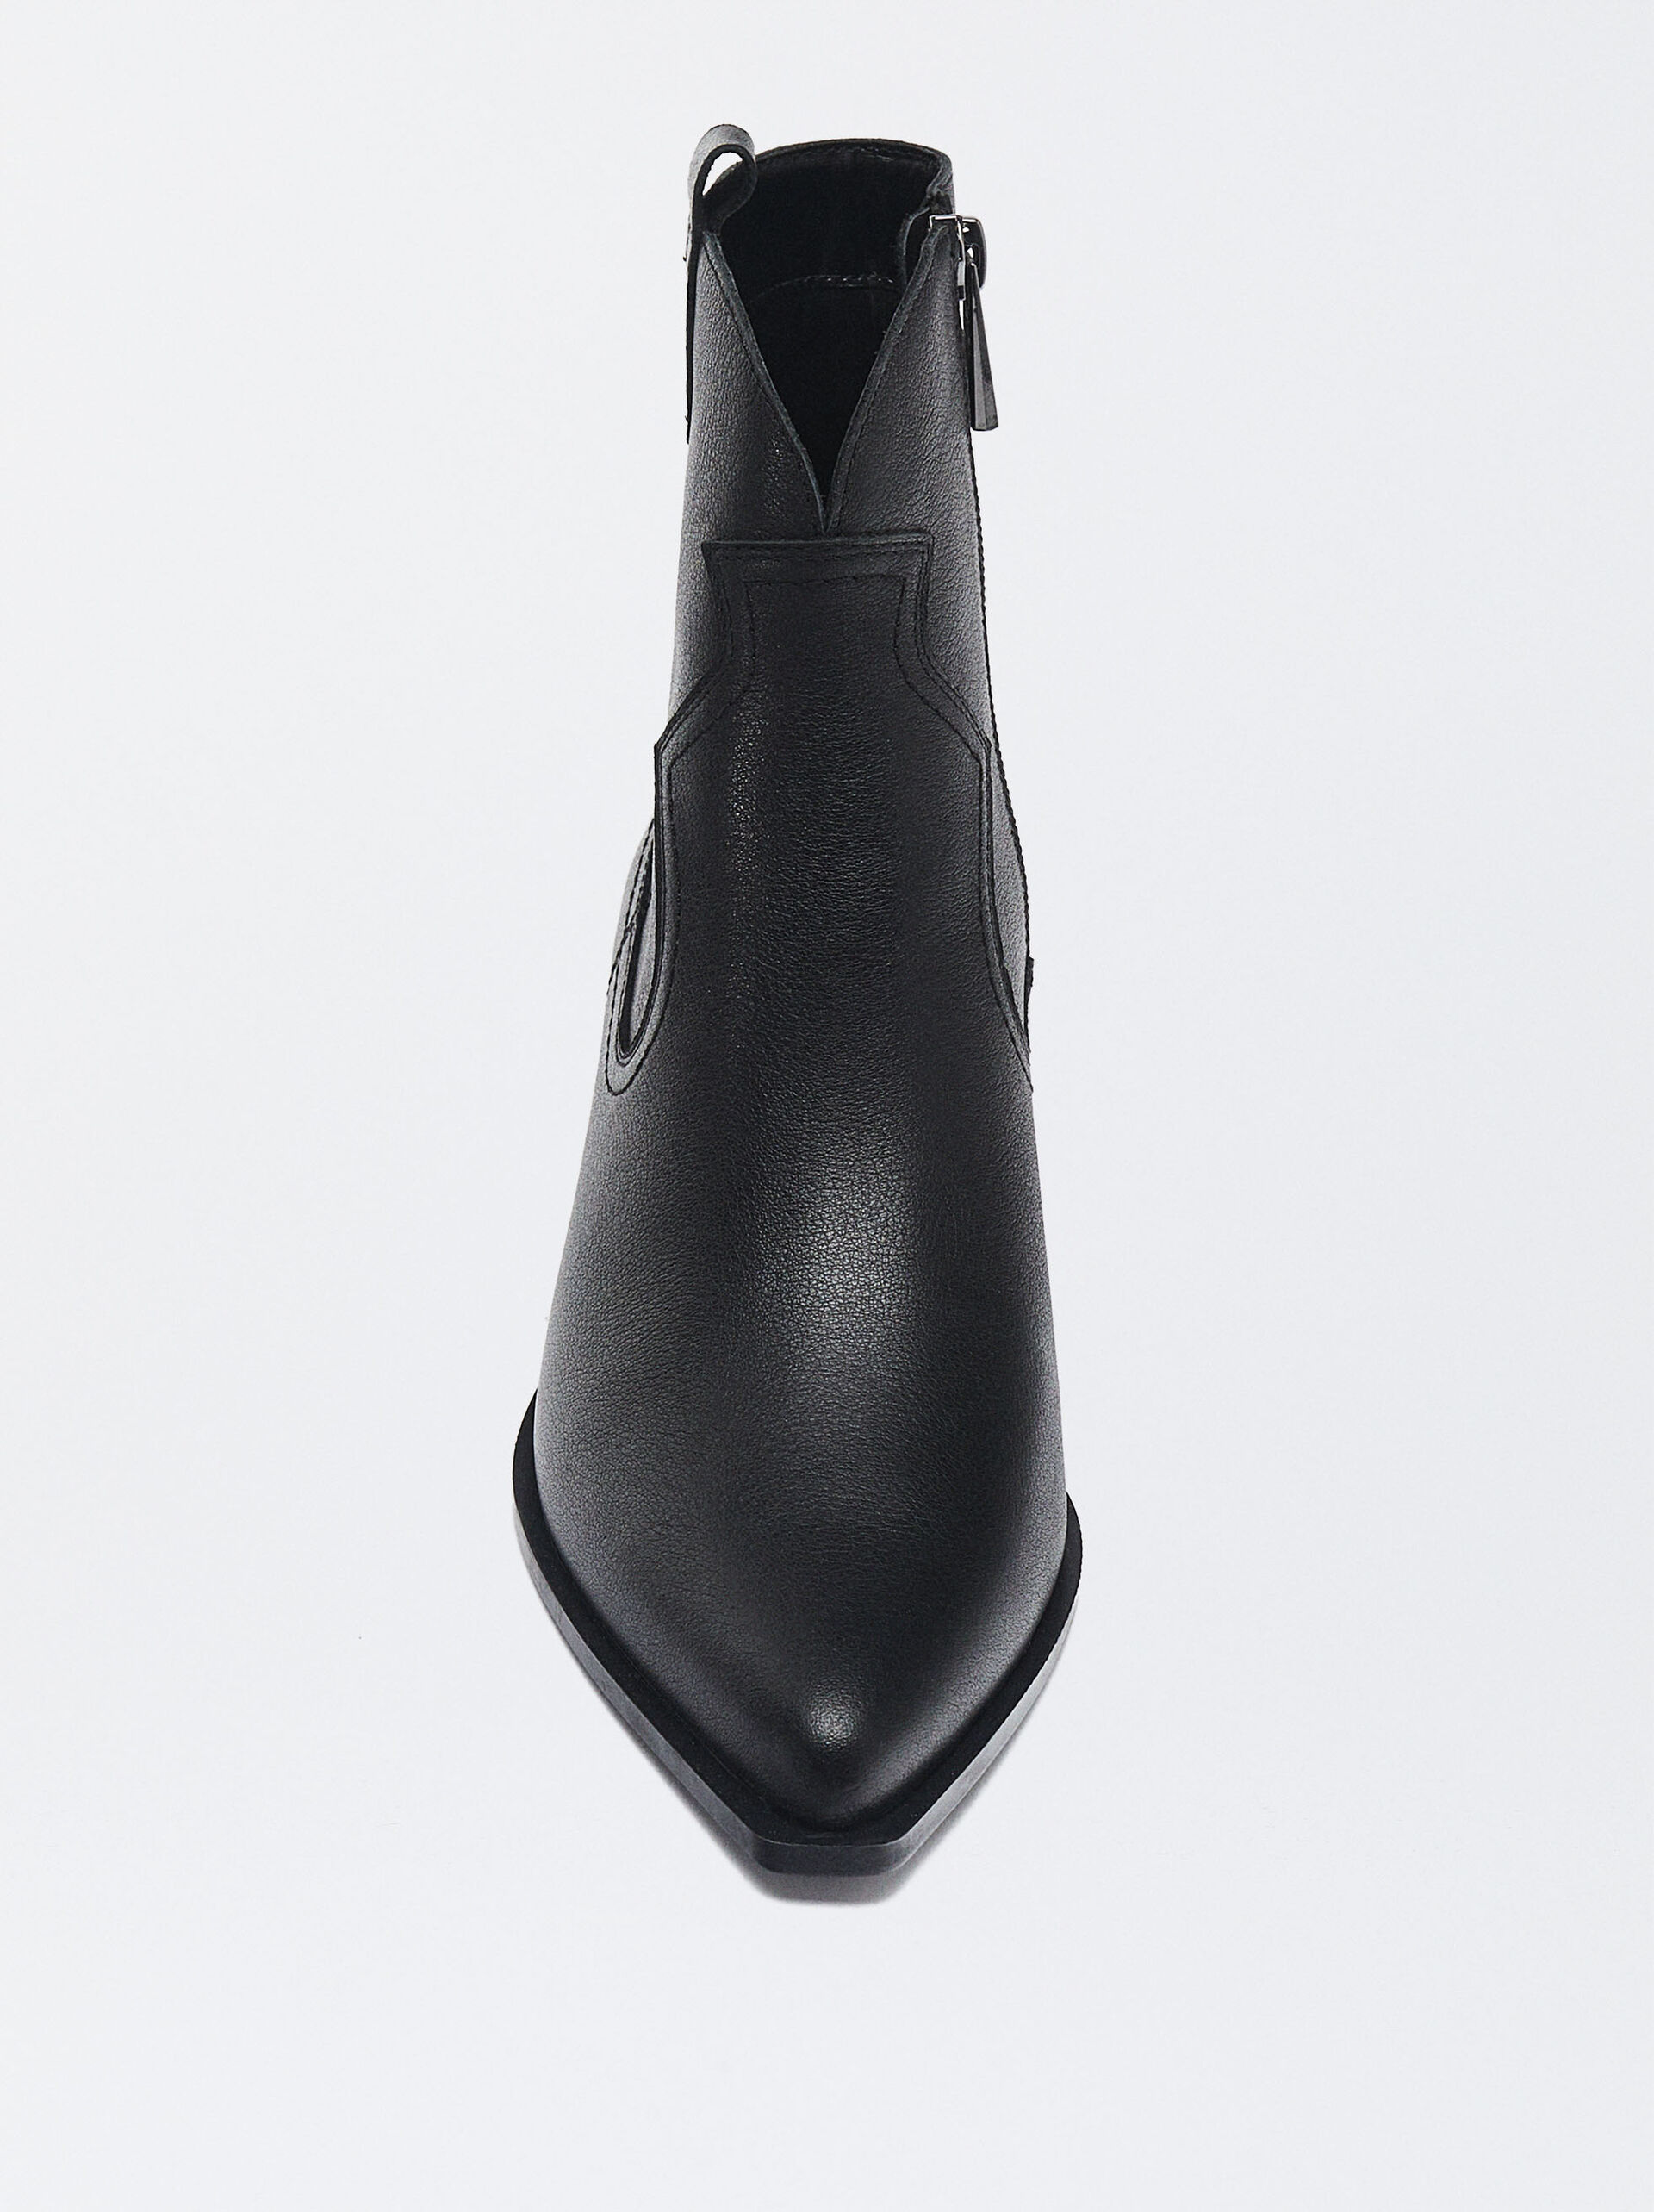 Online Exclusive - Leather Cowboy Boots image number 2.0